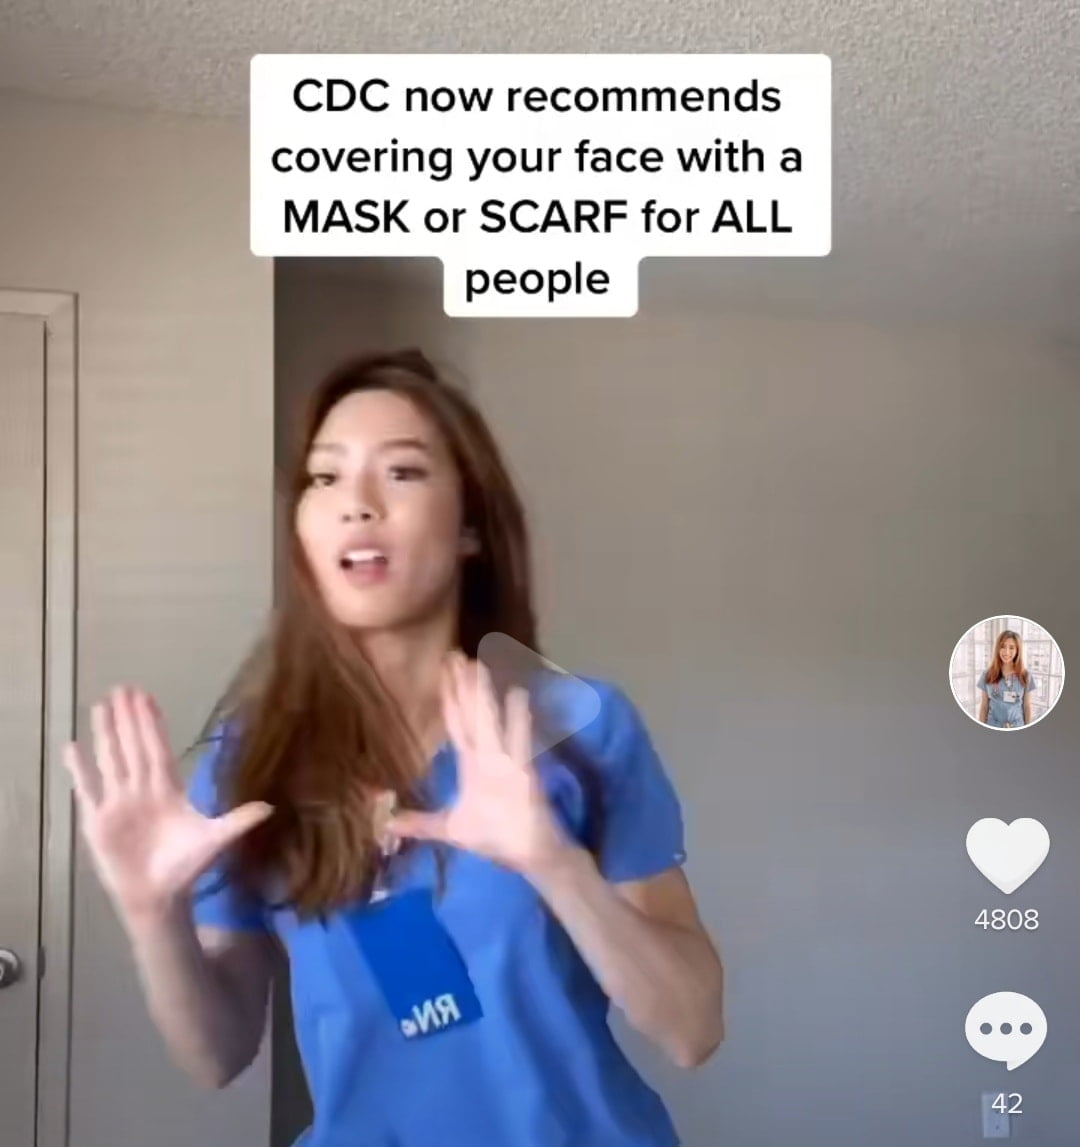 Dancing TikTok nurses switched from "face masks don't work"...